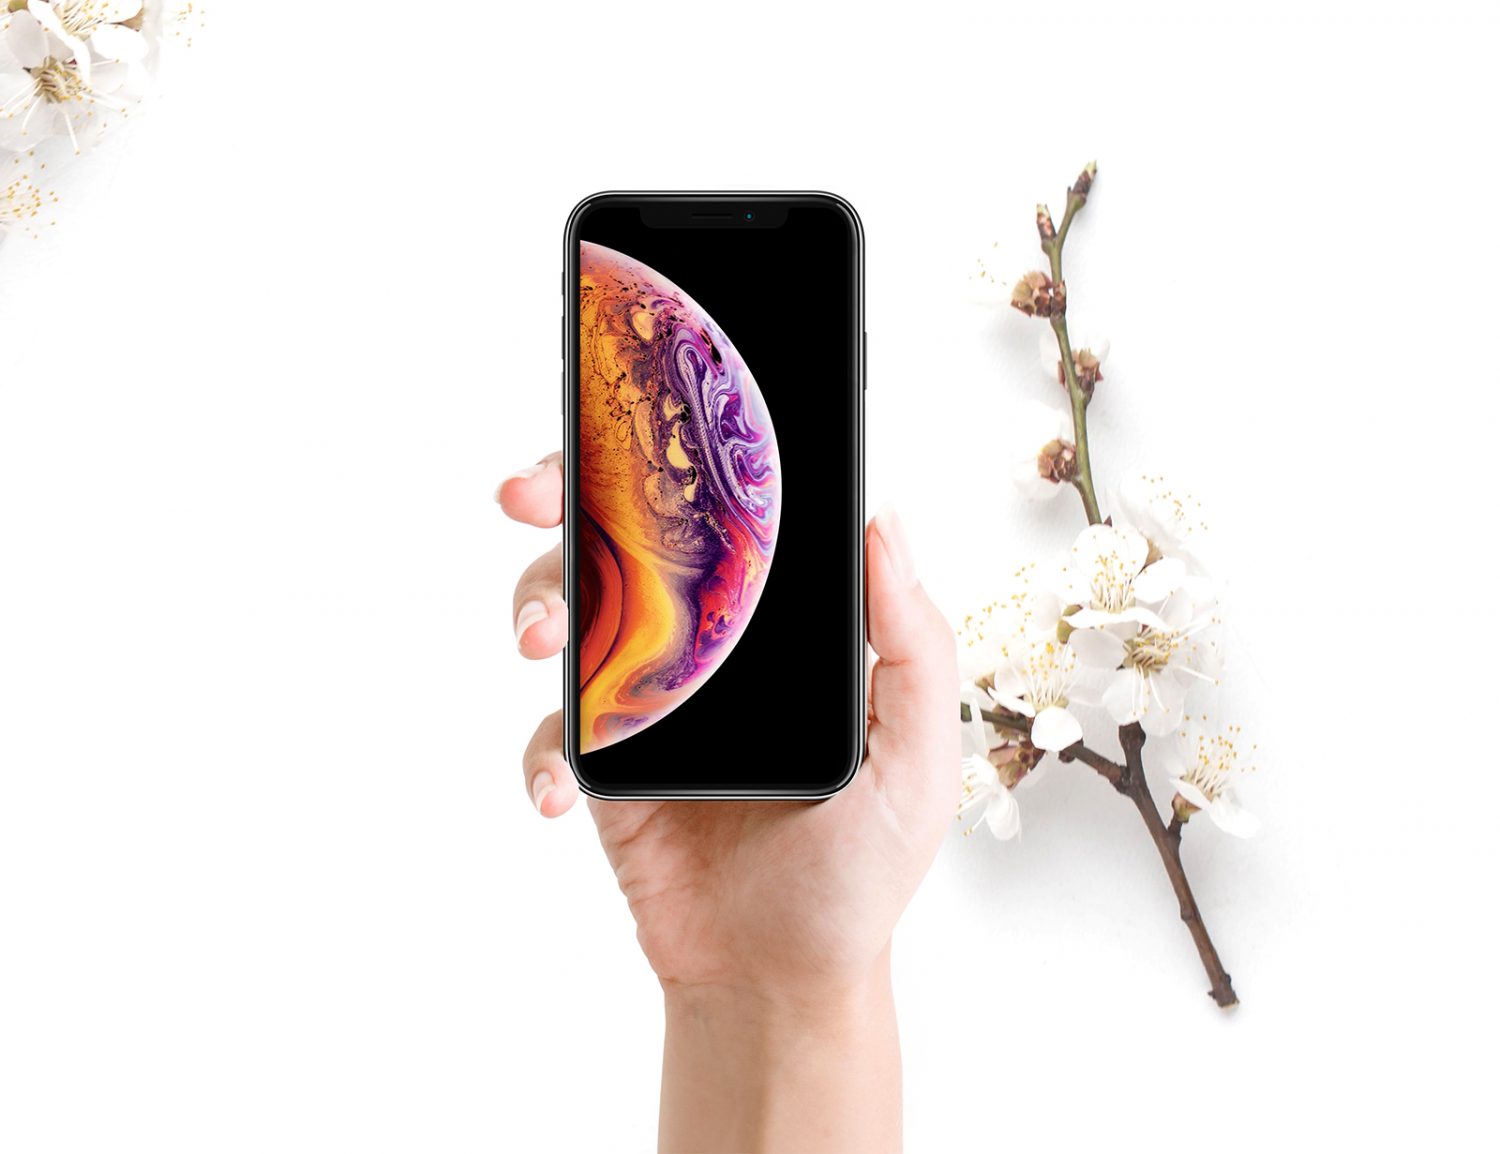 iPhone and Flowers Mockup